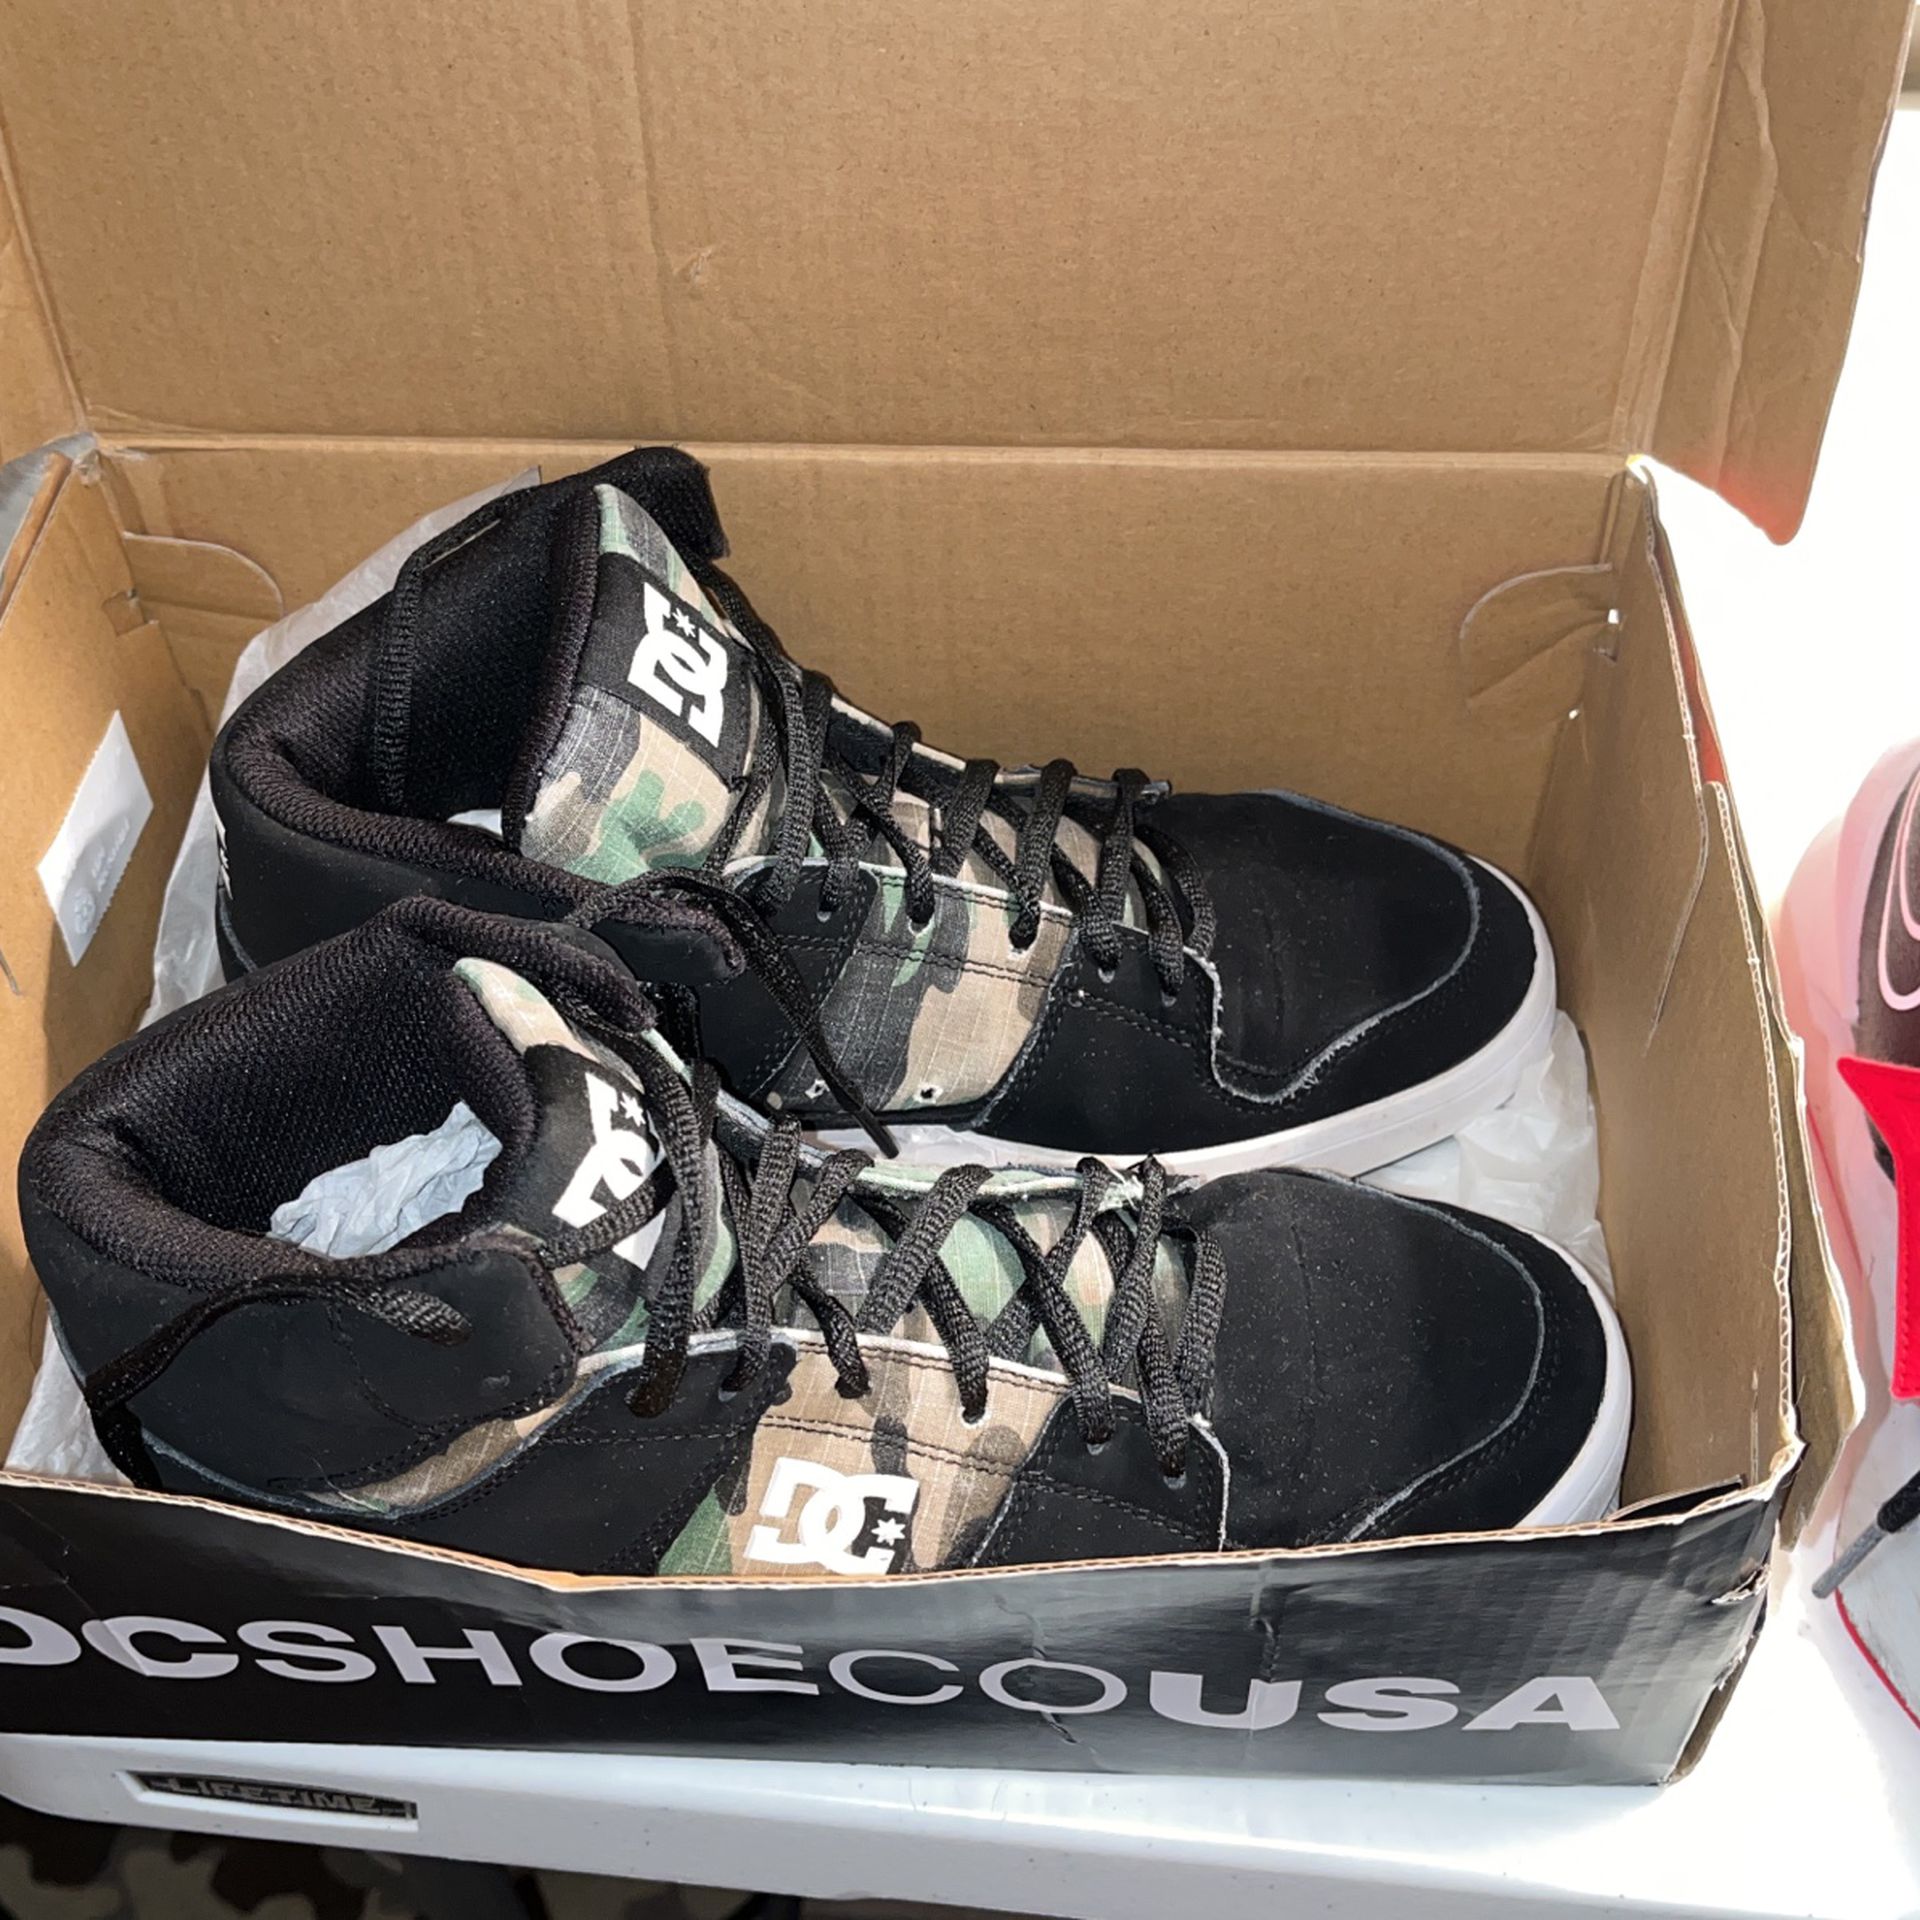 steno Panorama De databank Dc Shoes Boys Size 8 for Sale in Largo, FL - OfferUp